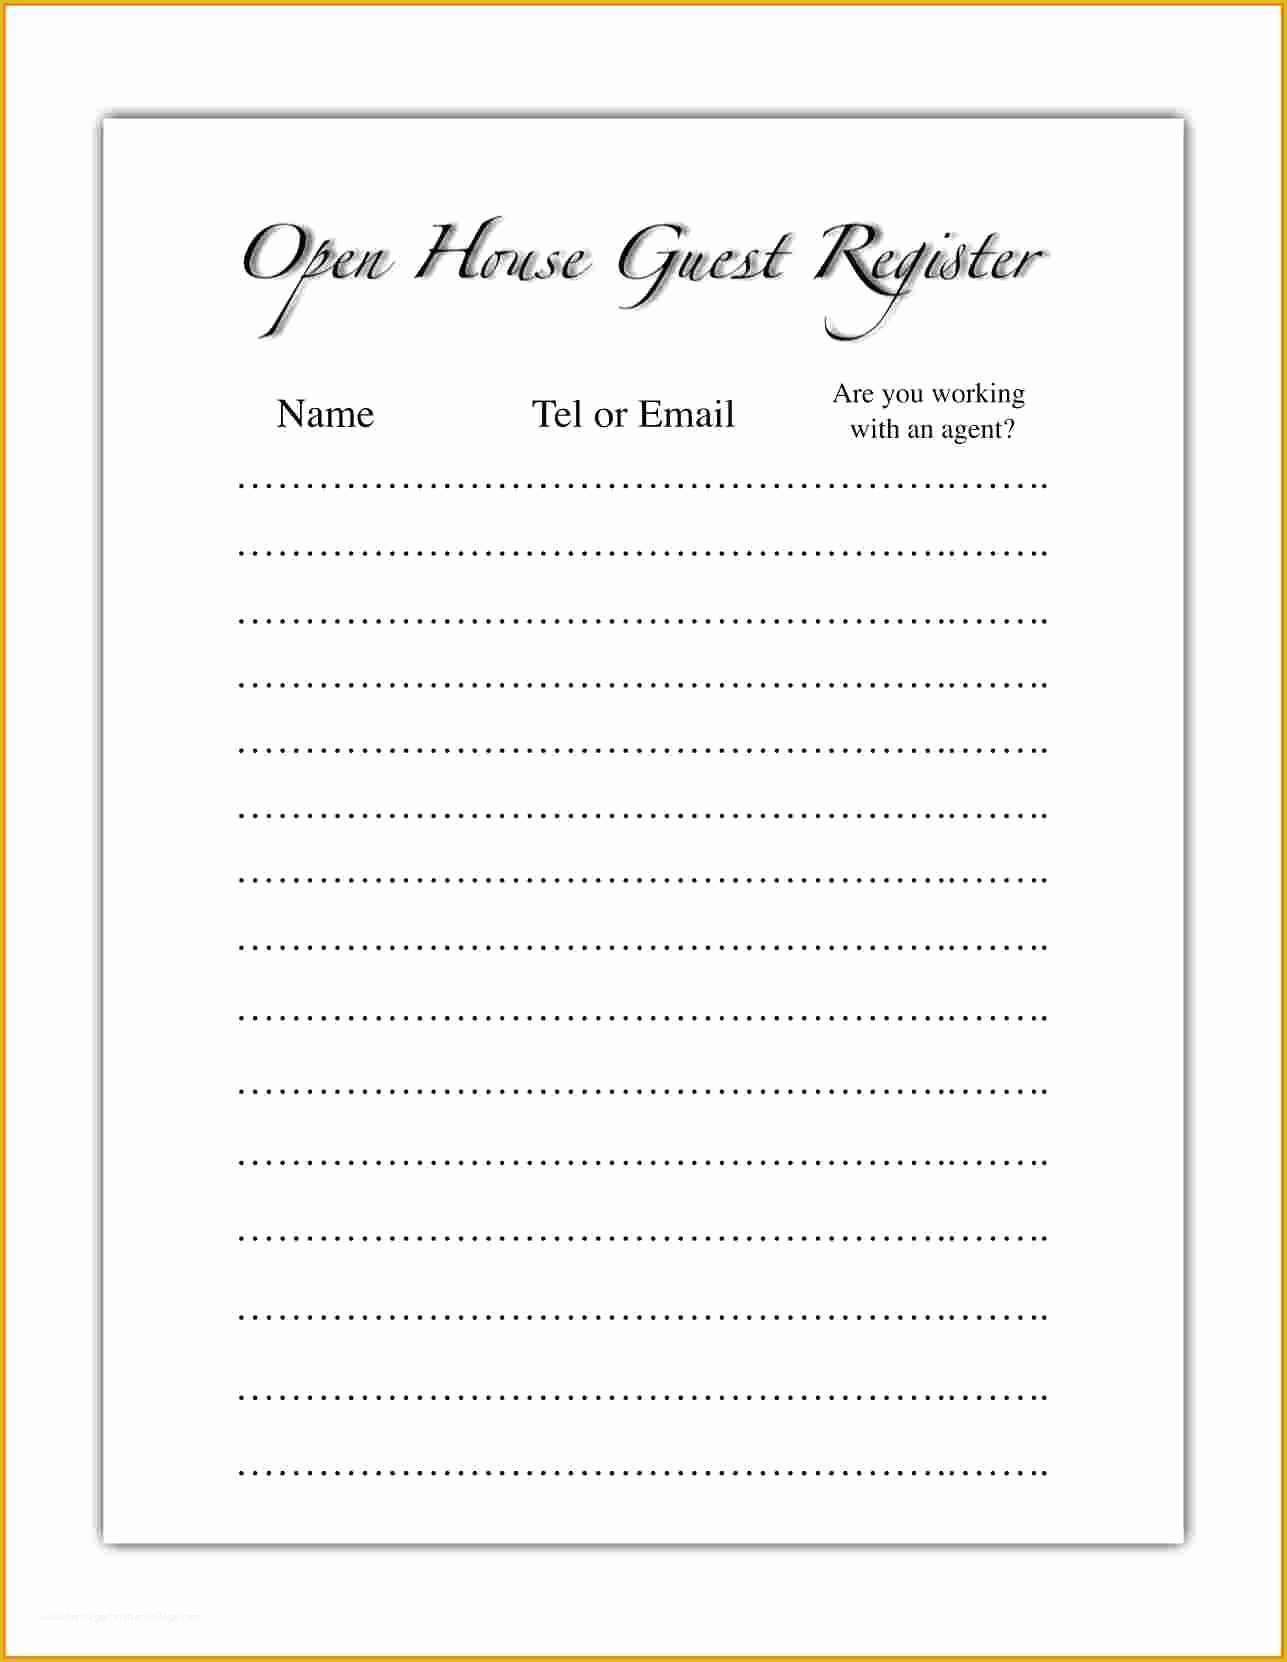 Guest House Website Templates Free Download Of Free Open House Guest Registration form Template